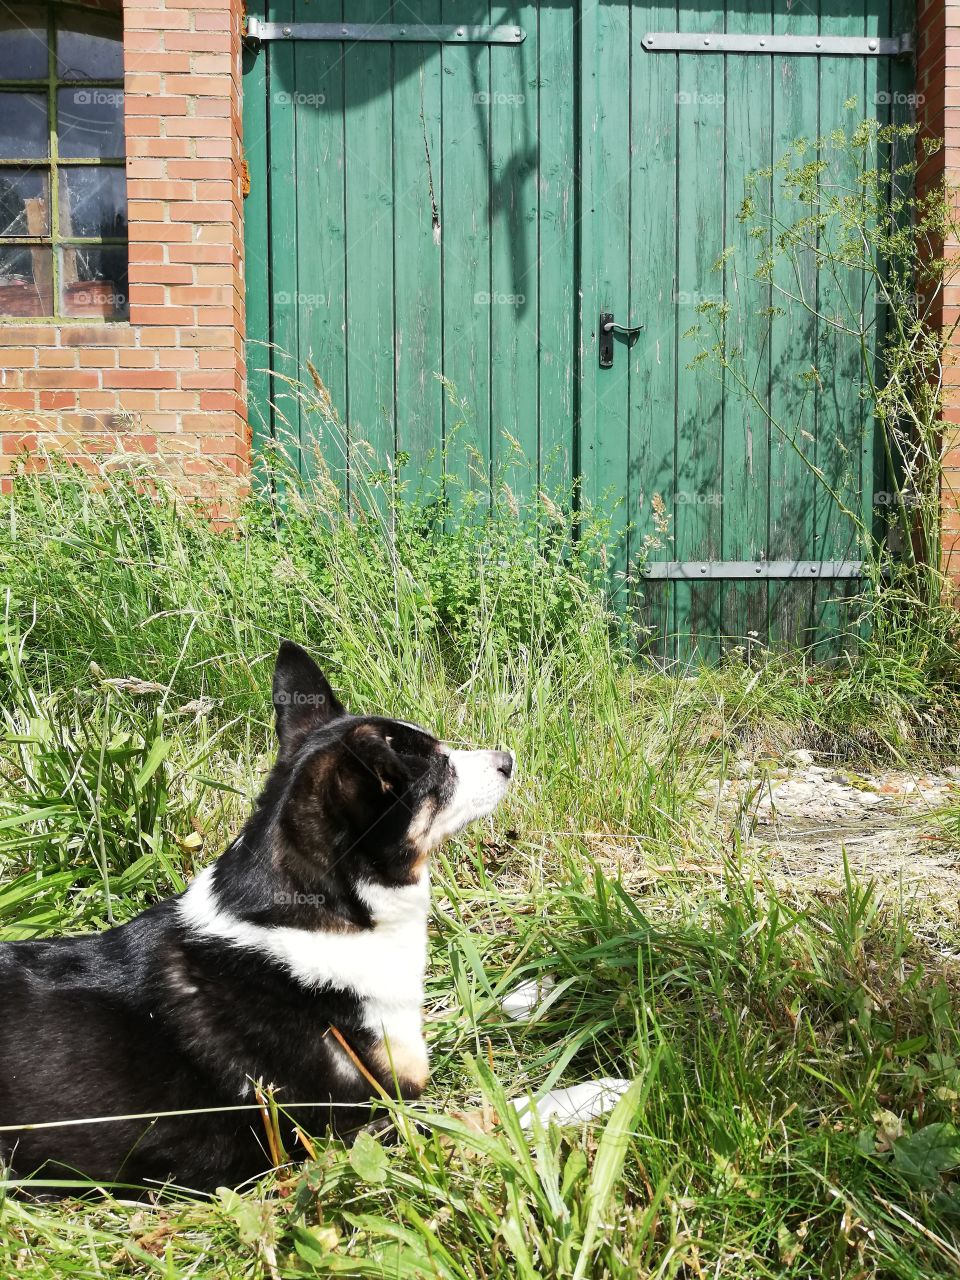 Dog lying in the grass with a green farm door and red brick wall in the background